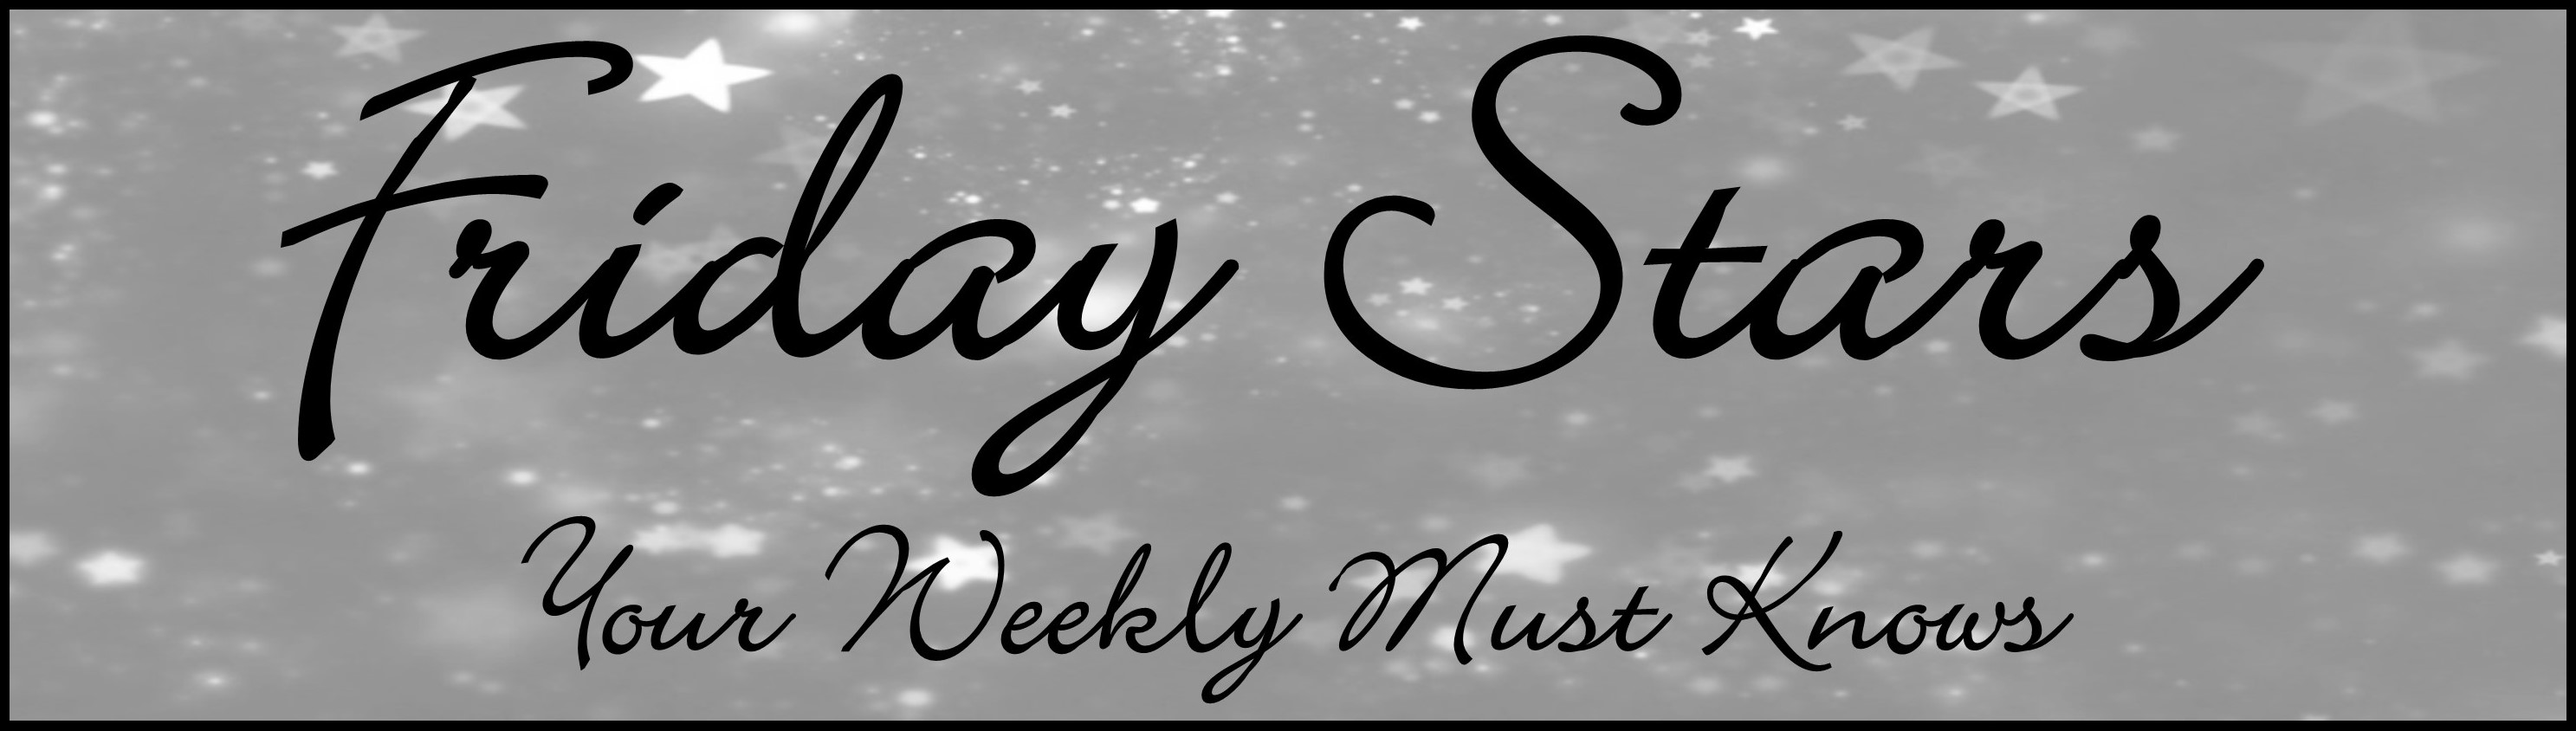 FRIDAY STARS – Your Weekly Must Knows 08/13/15